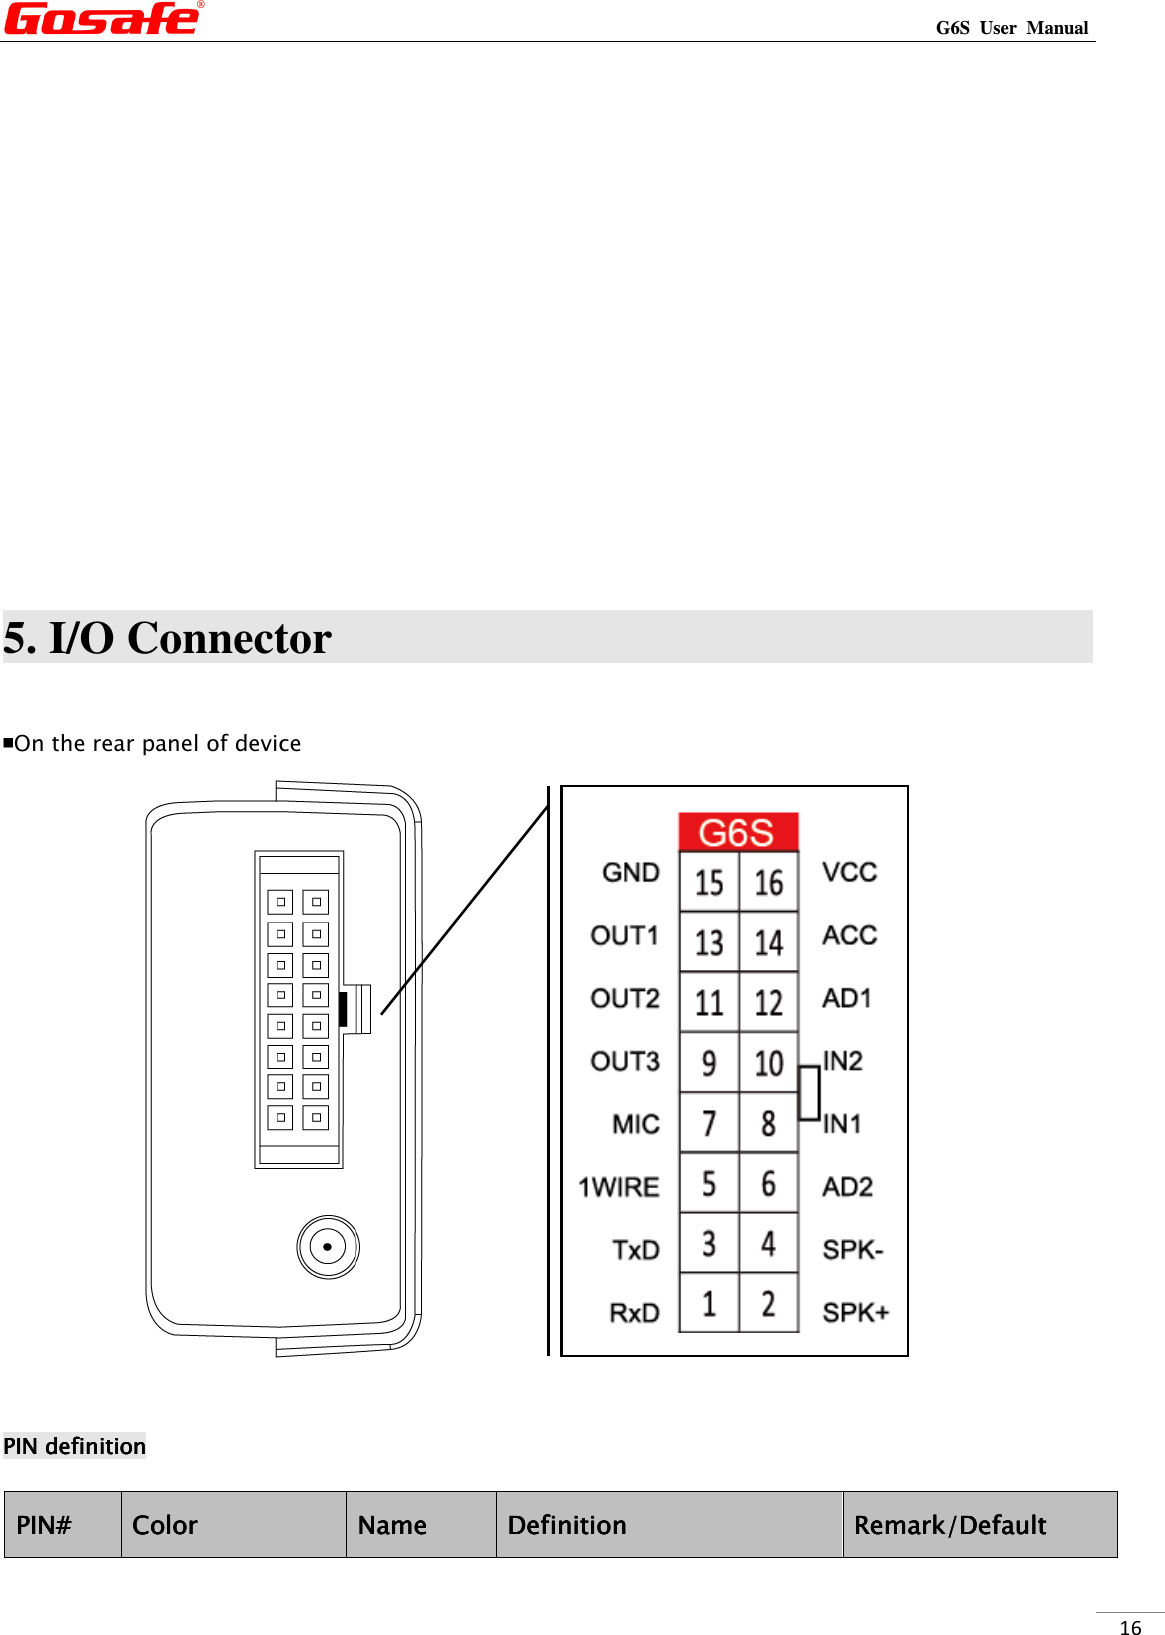                                                                                                                                                             G6S  User  Manual  16         5. I/O Connector                                    ￭On the rear panel of device                   PIN definitionPIN definitionPIN definitionPIN definition    PIN#PIN#PIN#PIN#     ColorColorColorColor     NameNameNameName     DefinitionDefinitionDefinitionDefinition     Remark/DefaultRemark/DefaultRemark/DefaultRemark/Default     